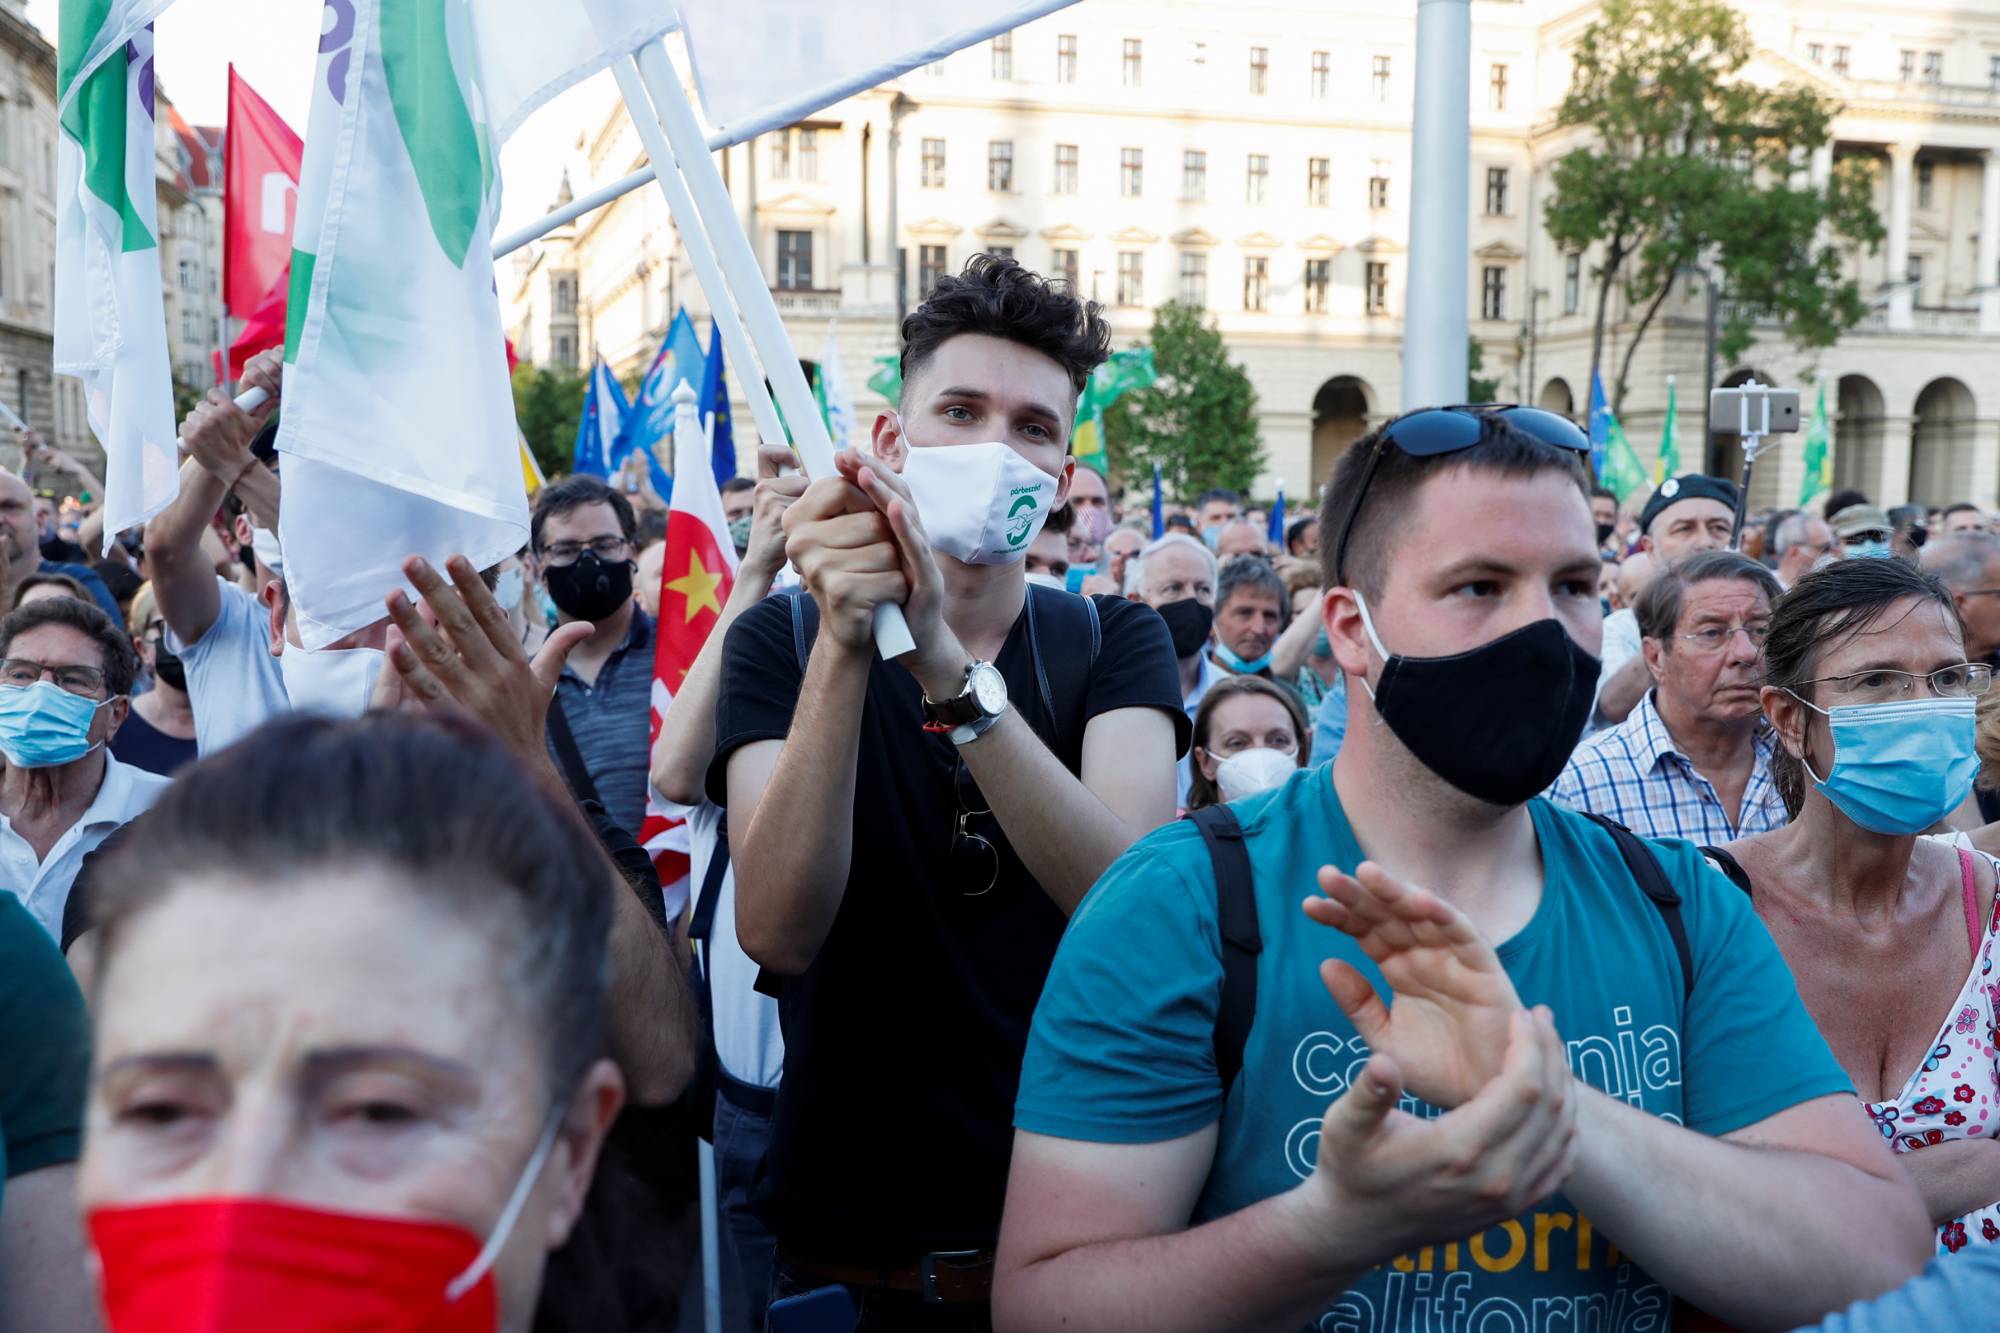 Demonstrators protest against the planned Chinese Fudan University campus in Budapest, Hungary, on June 5.  | REUTERS